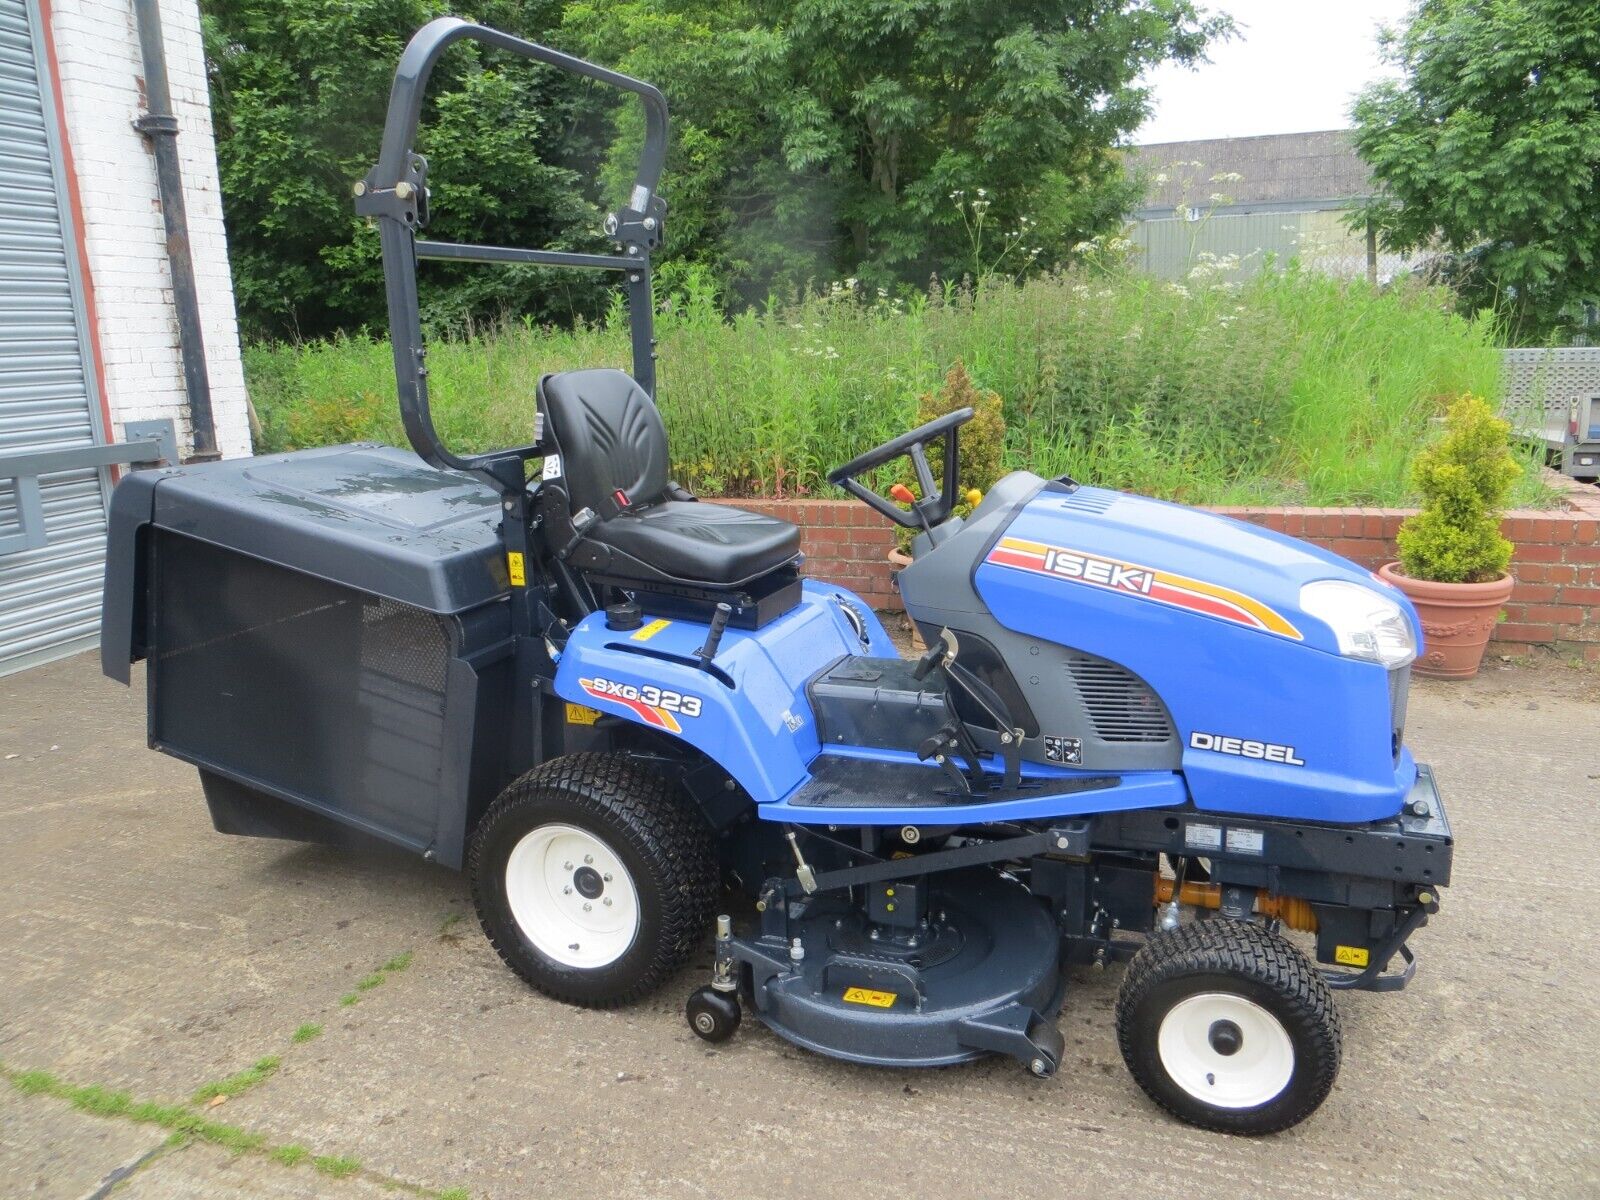 New and Used ISEKI SXG323 Groundcare Machinery, compact tractors and ride mowers near me.